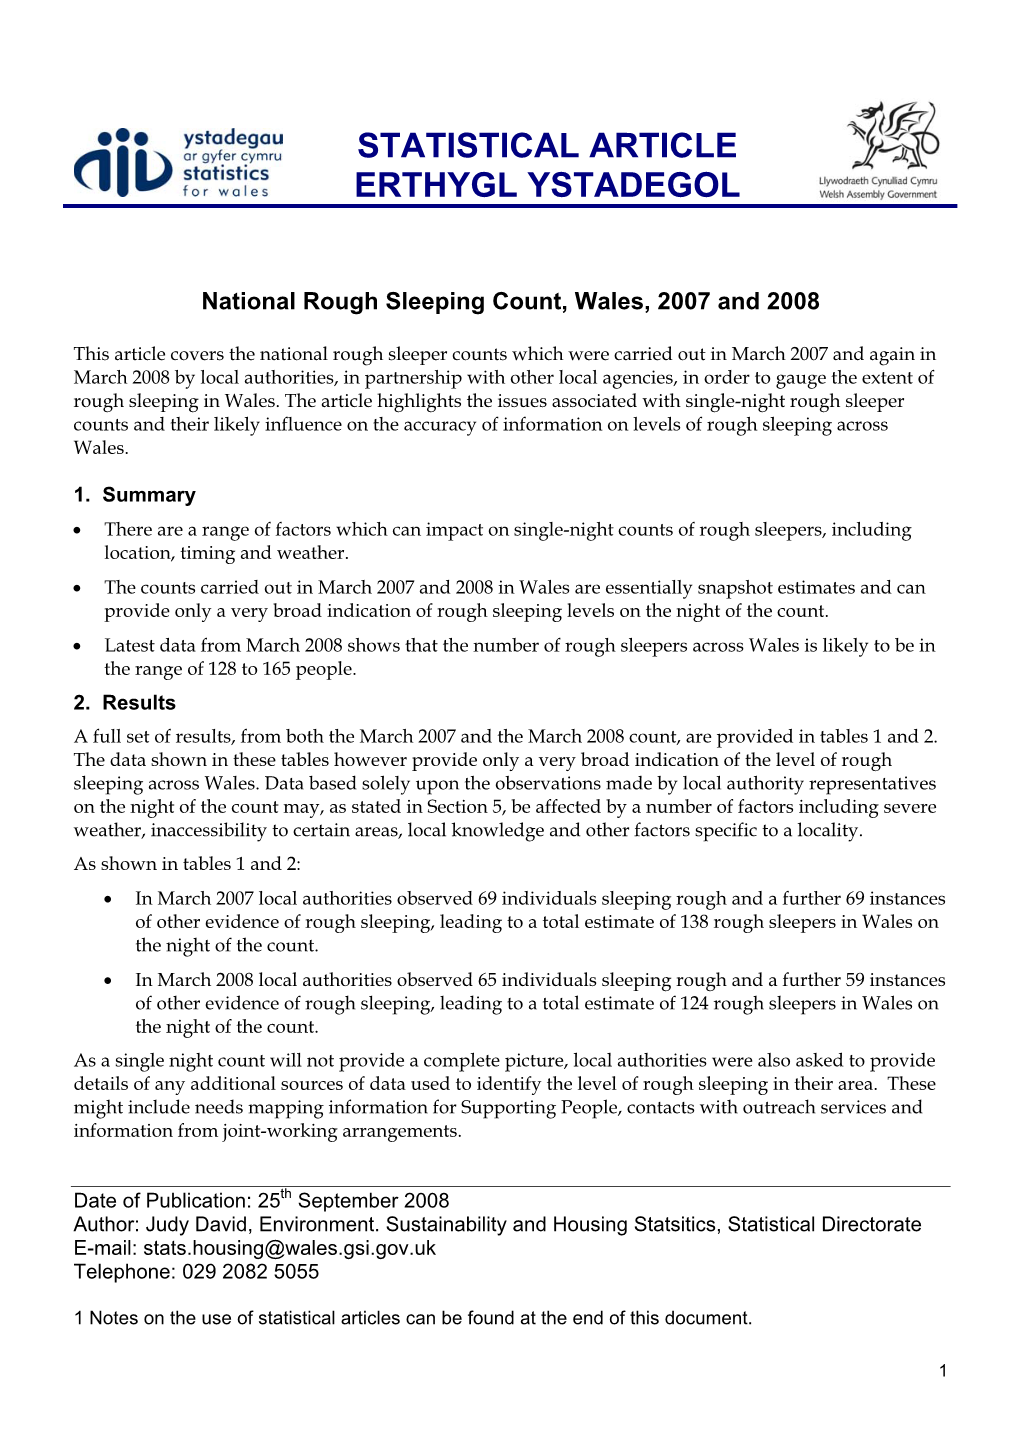 National Rough Sleeping Count, Wales, 2007 and 2008